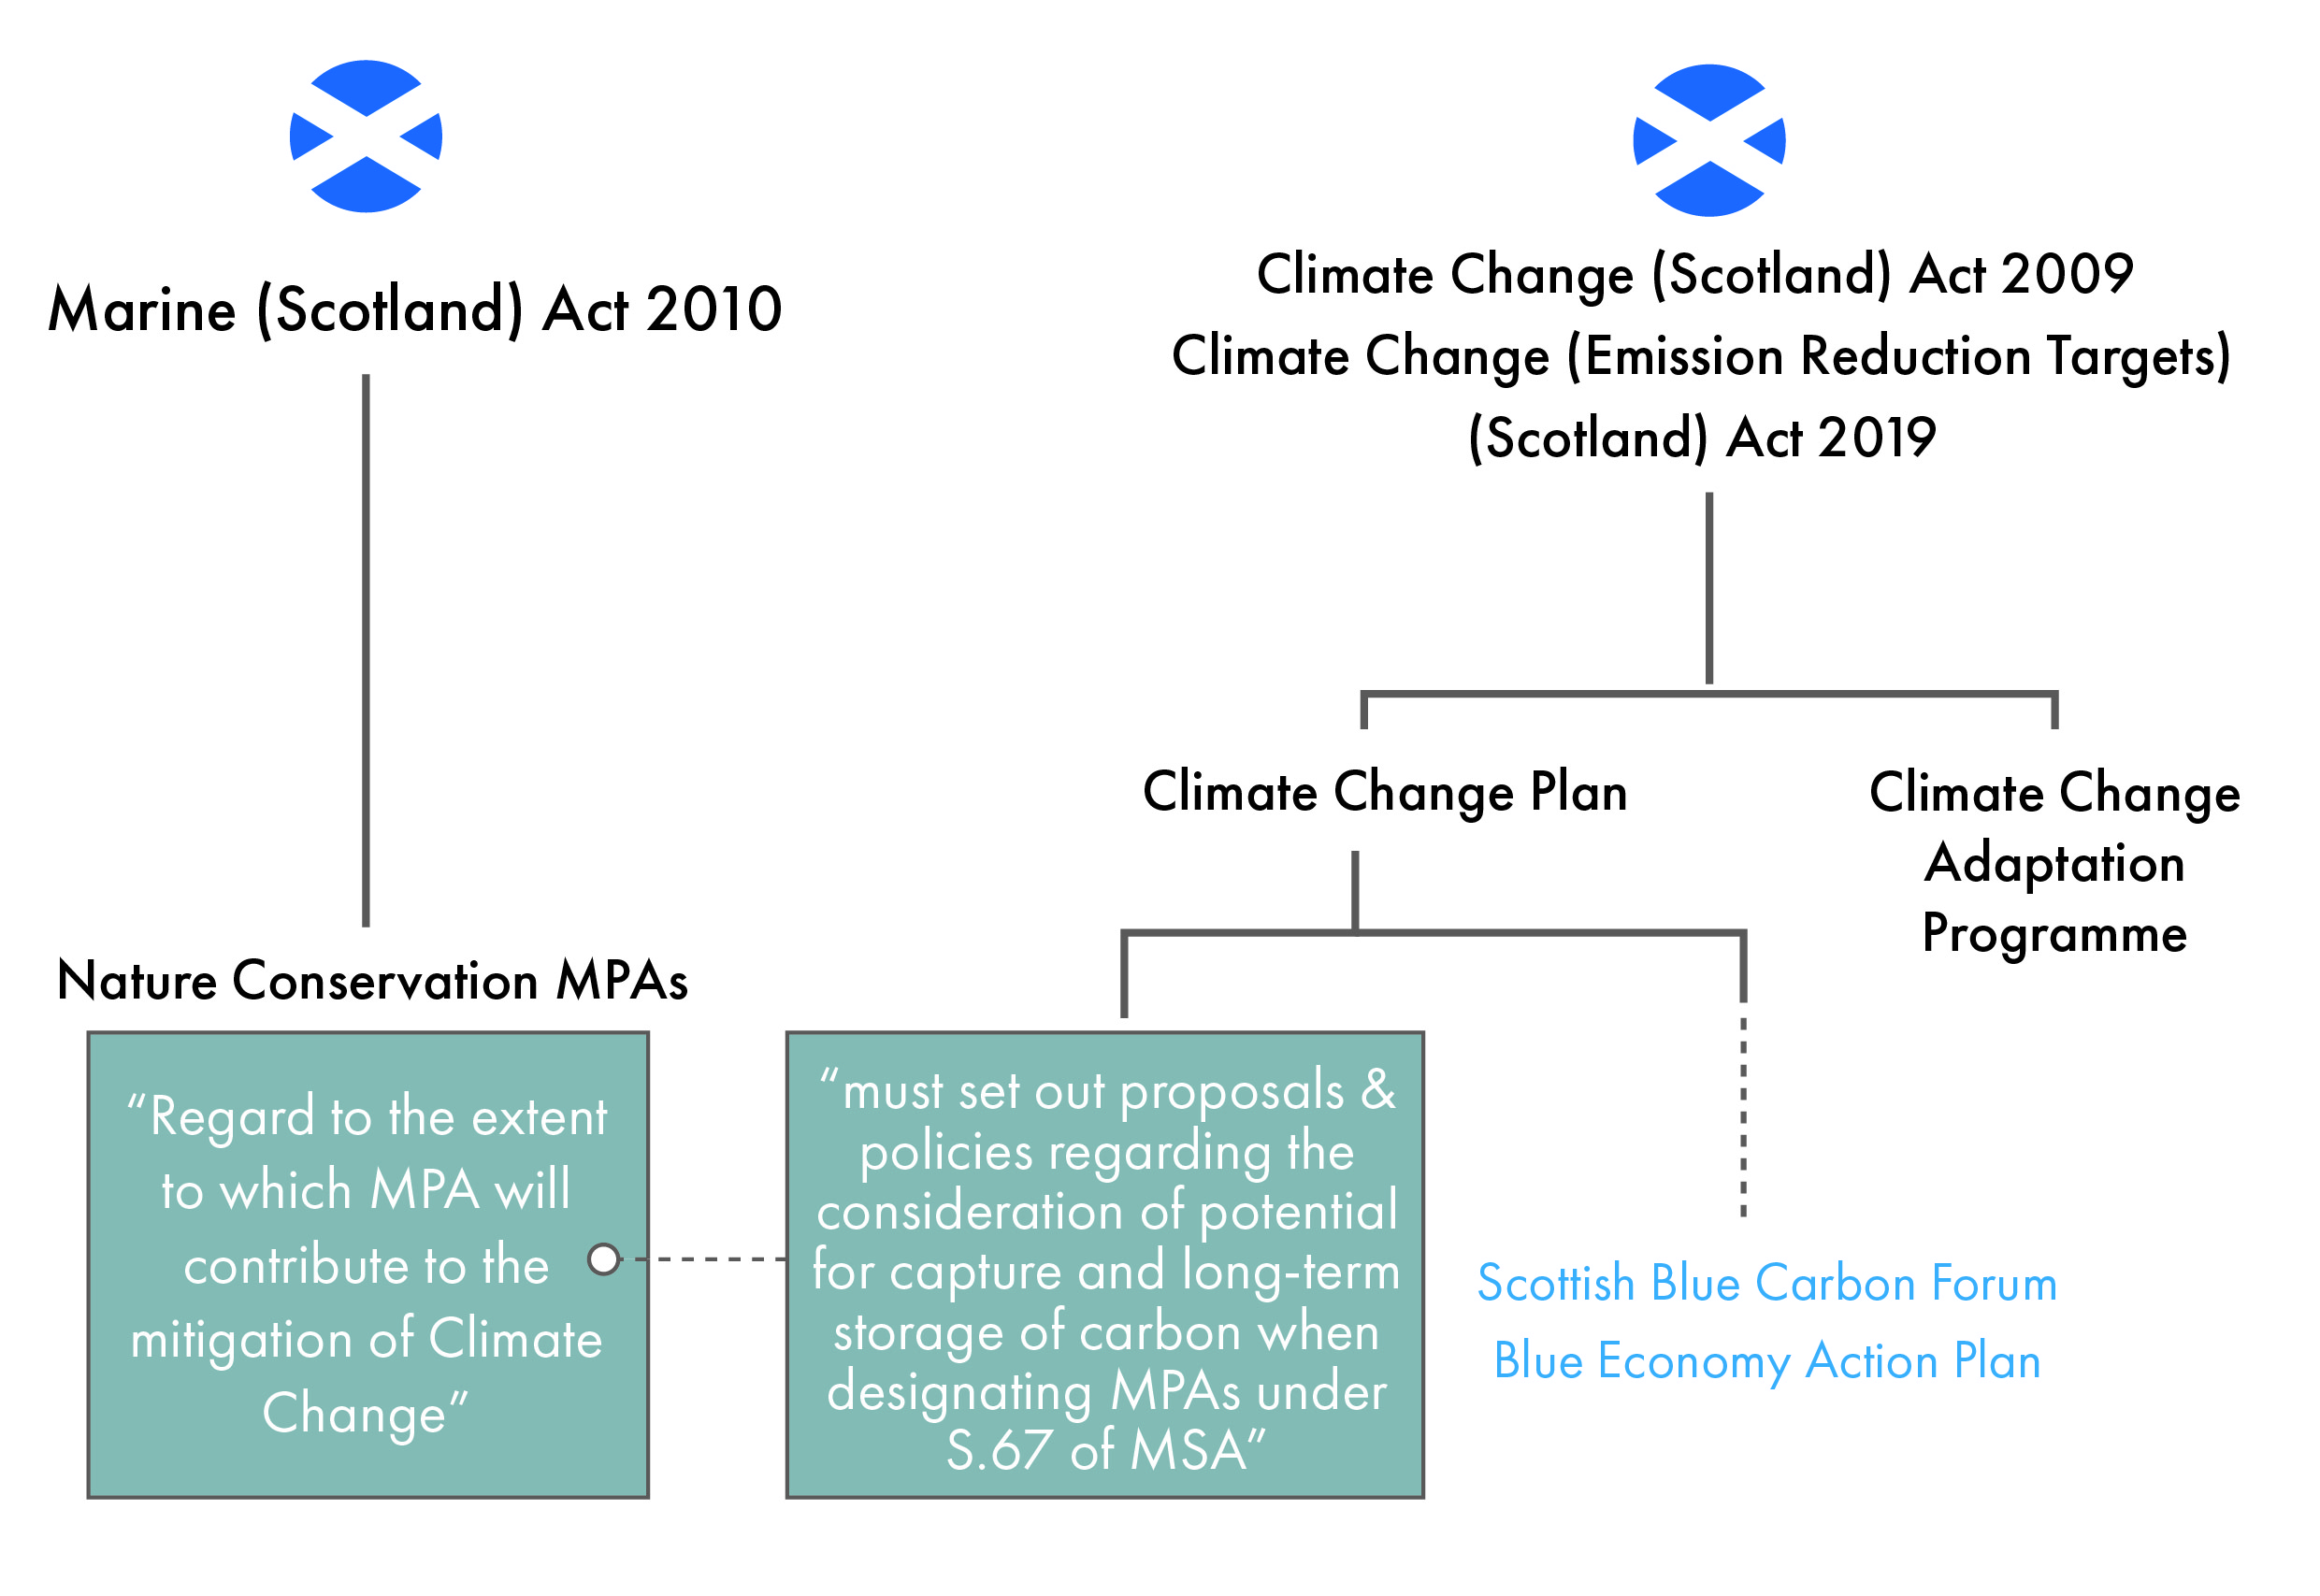 Plans and Programmes required by the Climate Change Acts, showing that the CCP must set out policies and proposals to consider carbon storage when designating MPAs under the Marine Scotland Act (shown on the left). Grey boxes indicate the requirements set out in the Acts. Dashed line and blue text indicates the consideration of blue carbon in the CCP and the CCPu.